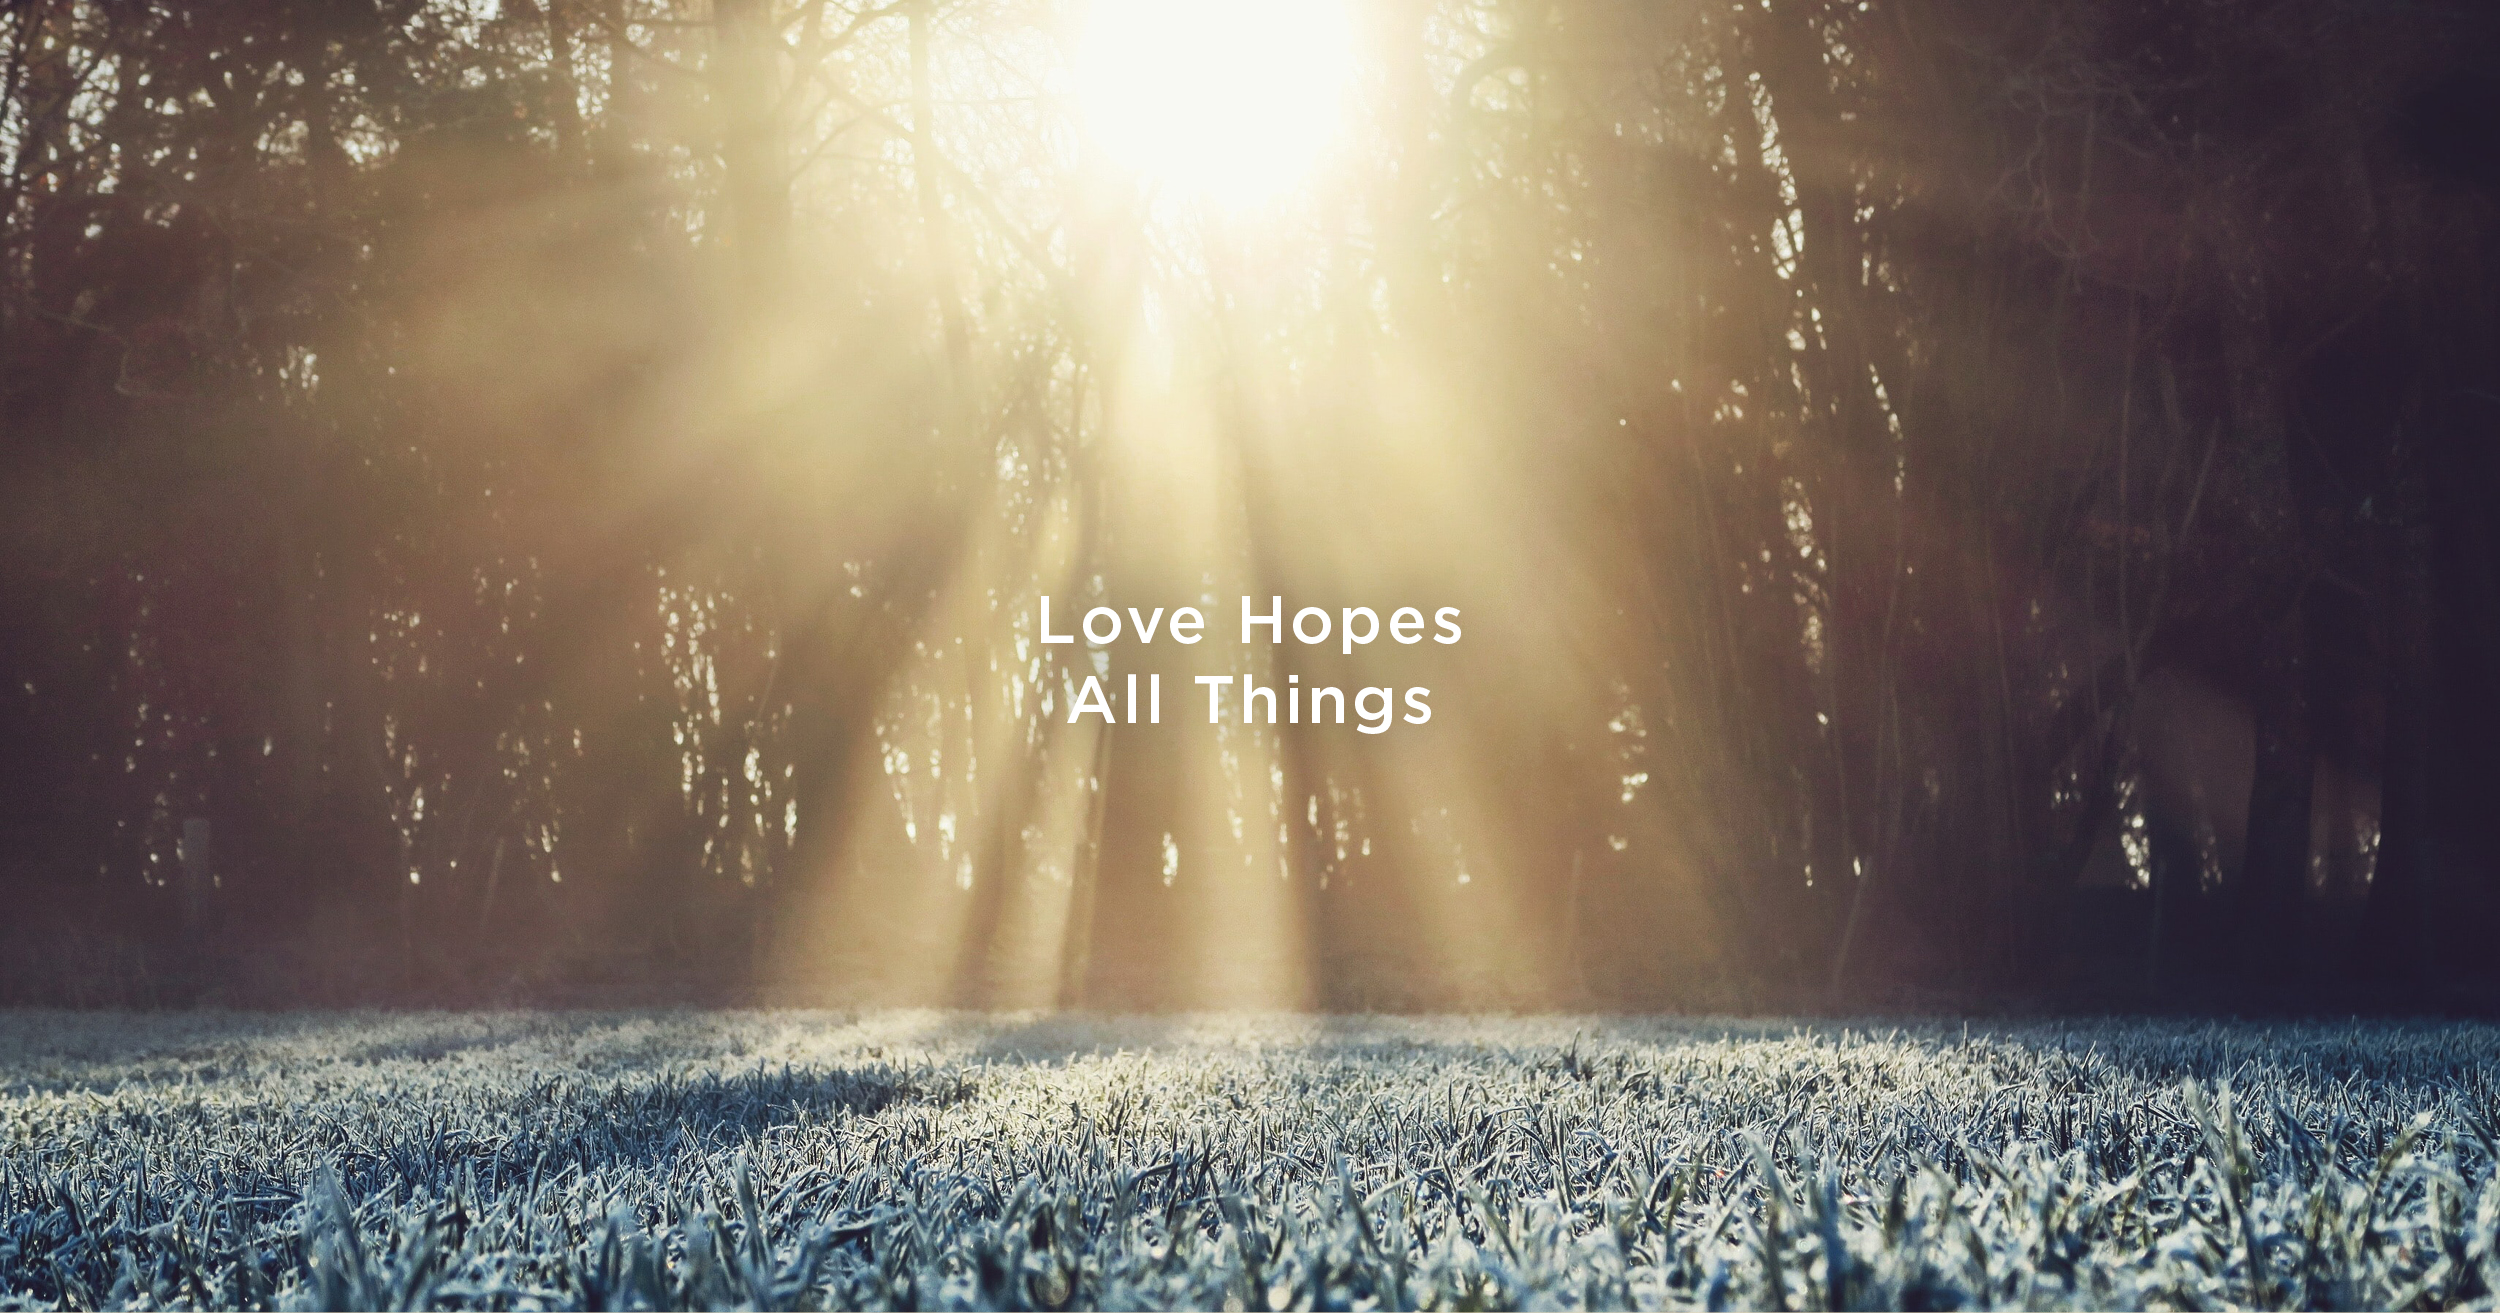 Love Hopes All Things | The Good Book Blog